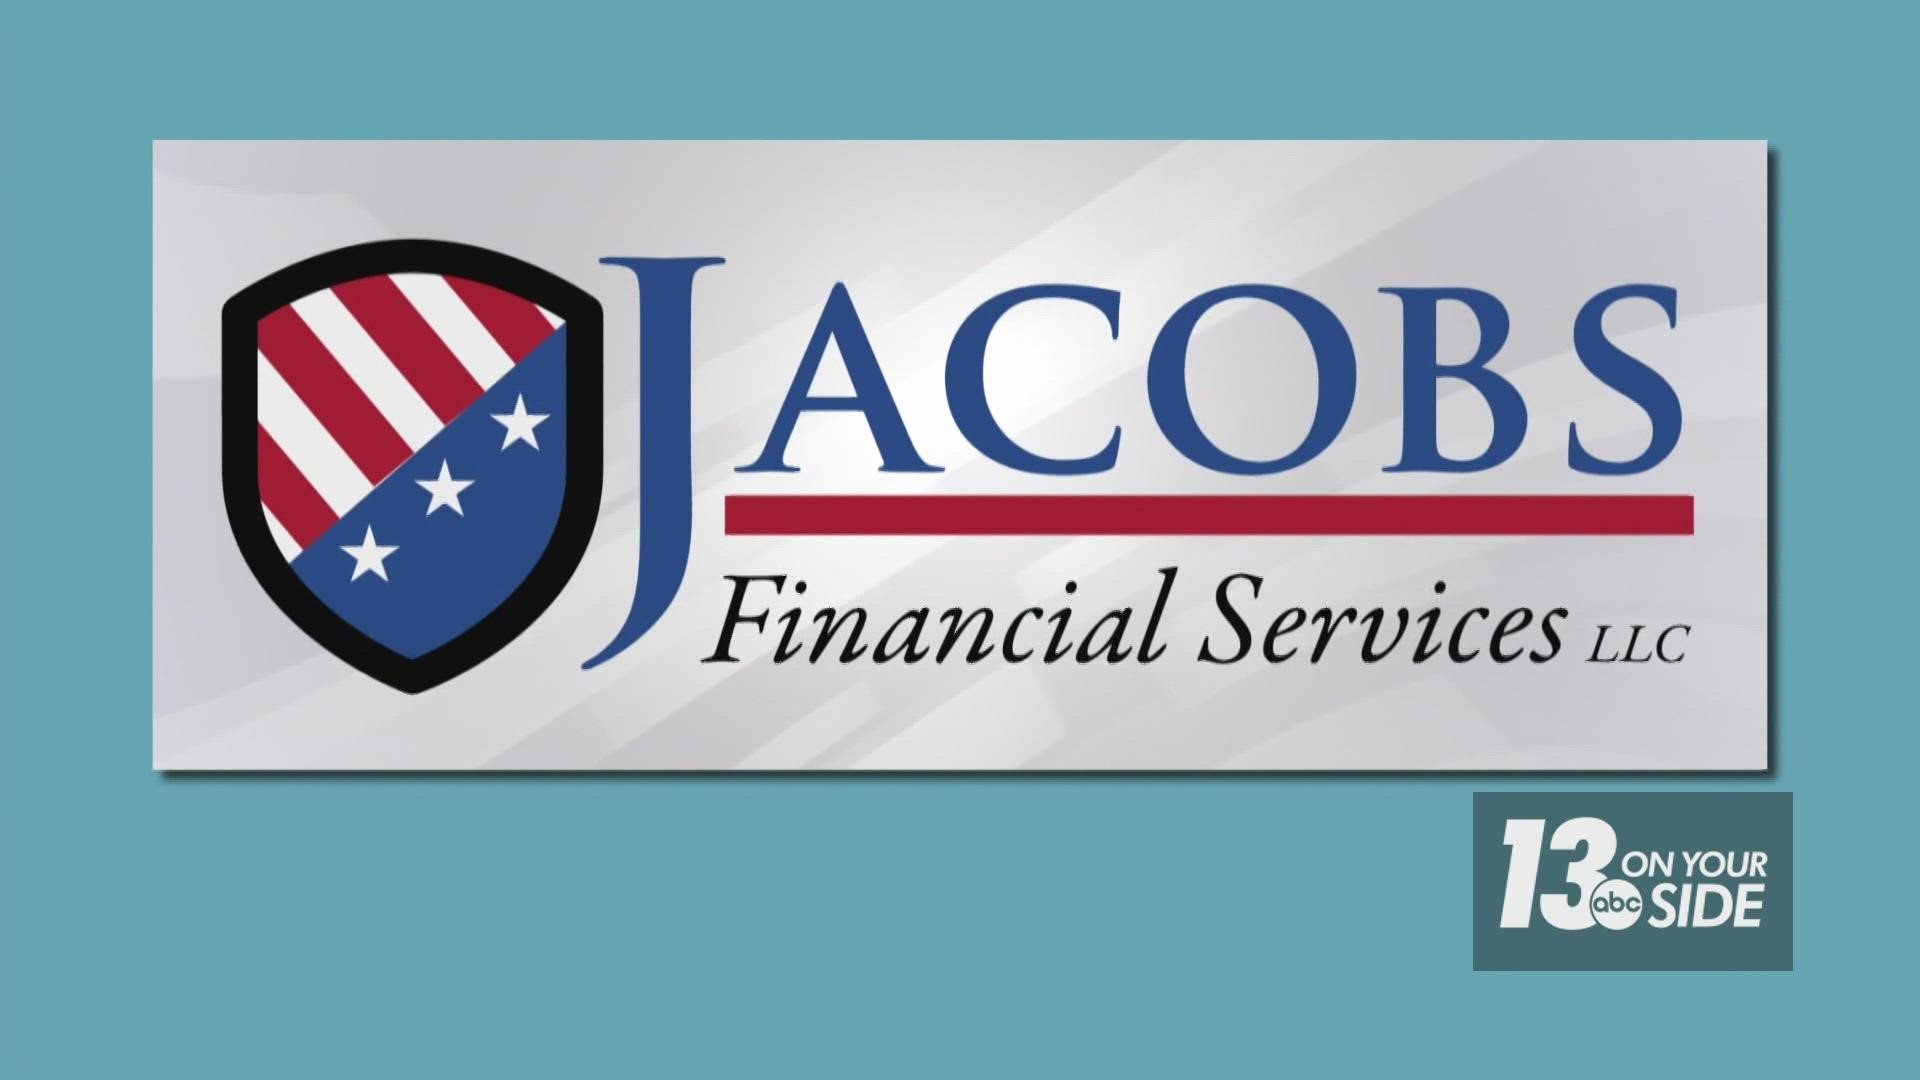 Whatever you envision, it requires a sound strategy to get you there, and Tom Jacobs, from Jacobs Financial Services, can help.